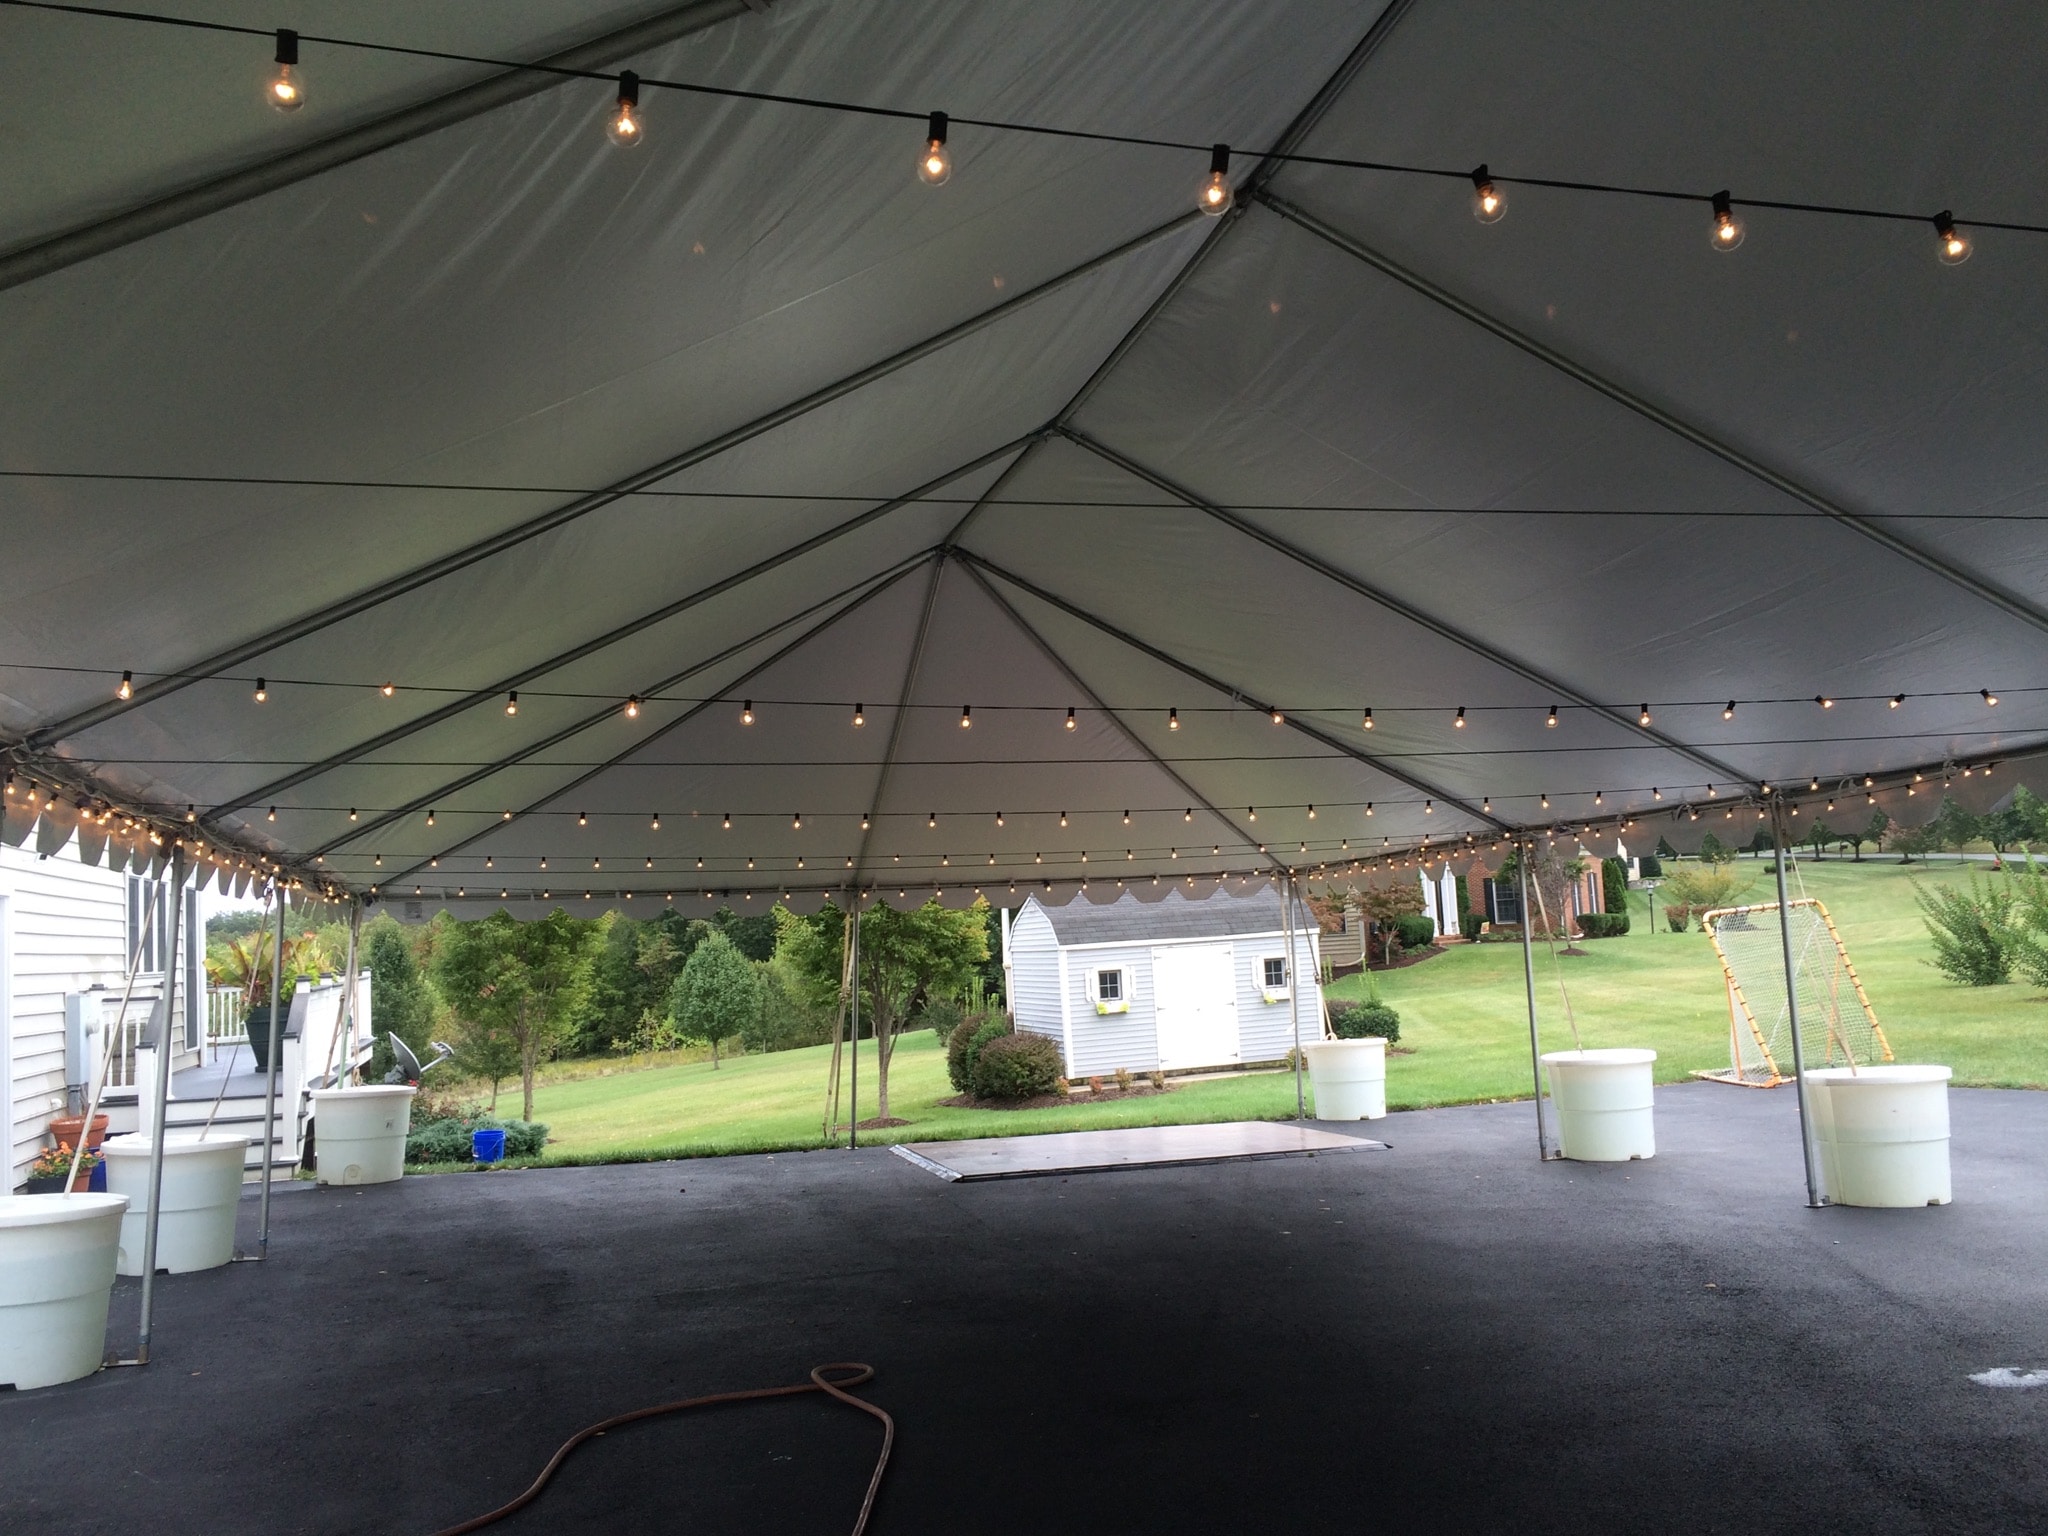 Party tent rental